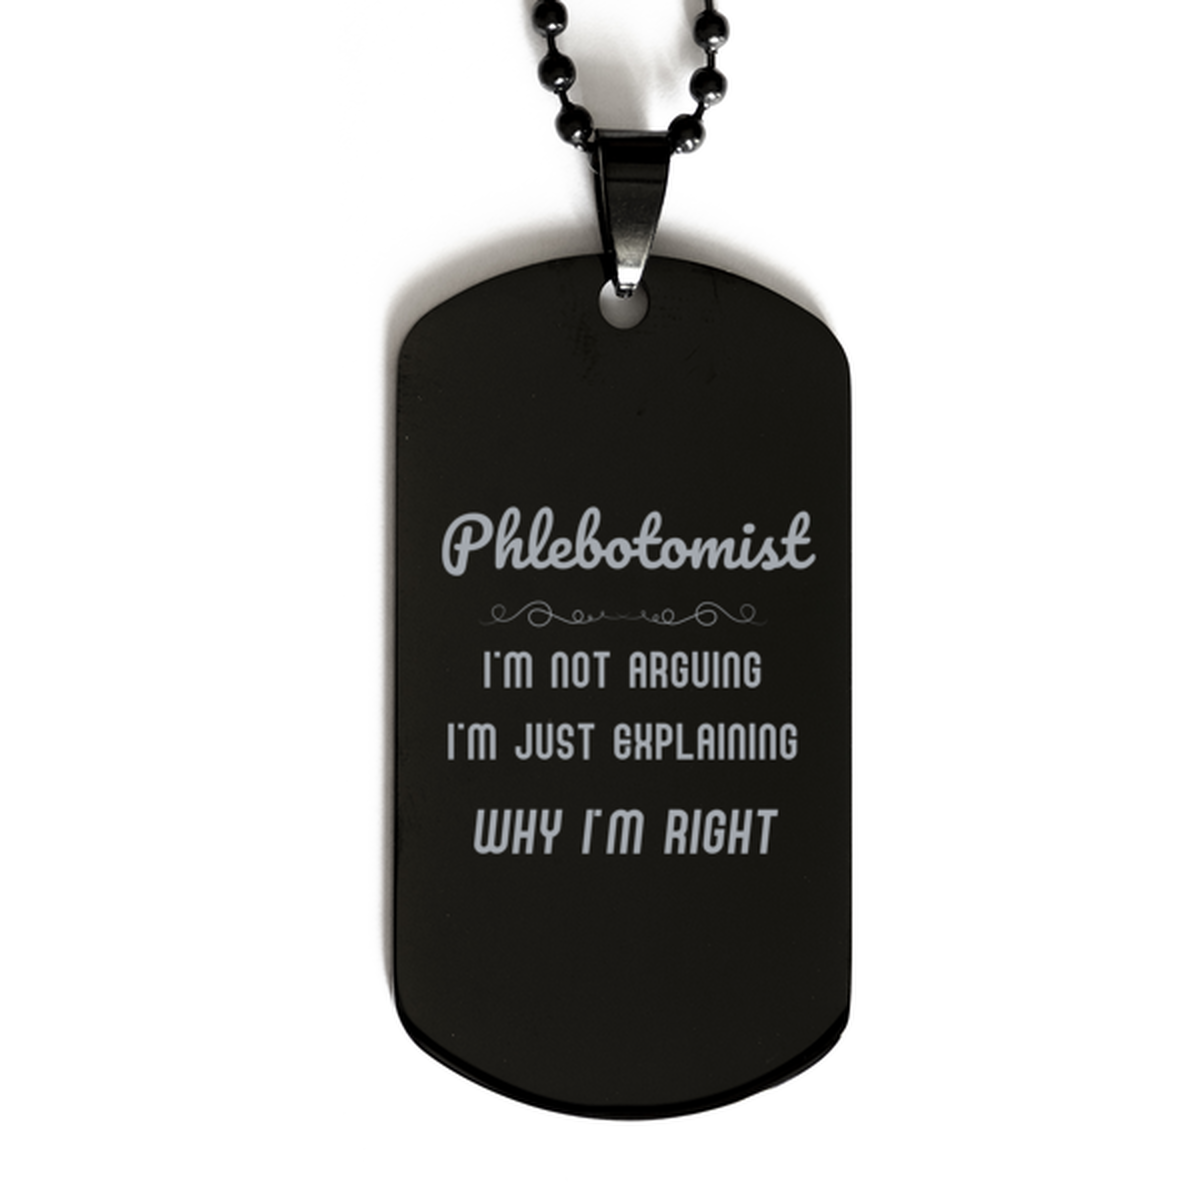 Phlebotomist I'm not Arguing. I'm Just Explaining Why I'm RIGHT Black Dog Tag, Funny Saying Quote Phlebotomist Gifts For Phlebotomist Graduation Birthday Christmas Gifts for Men Women Coworker